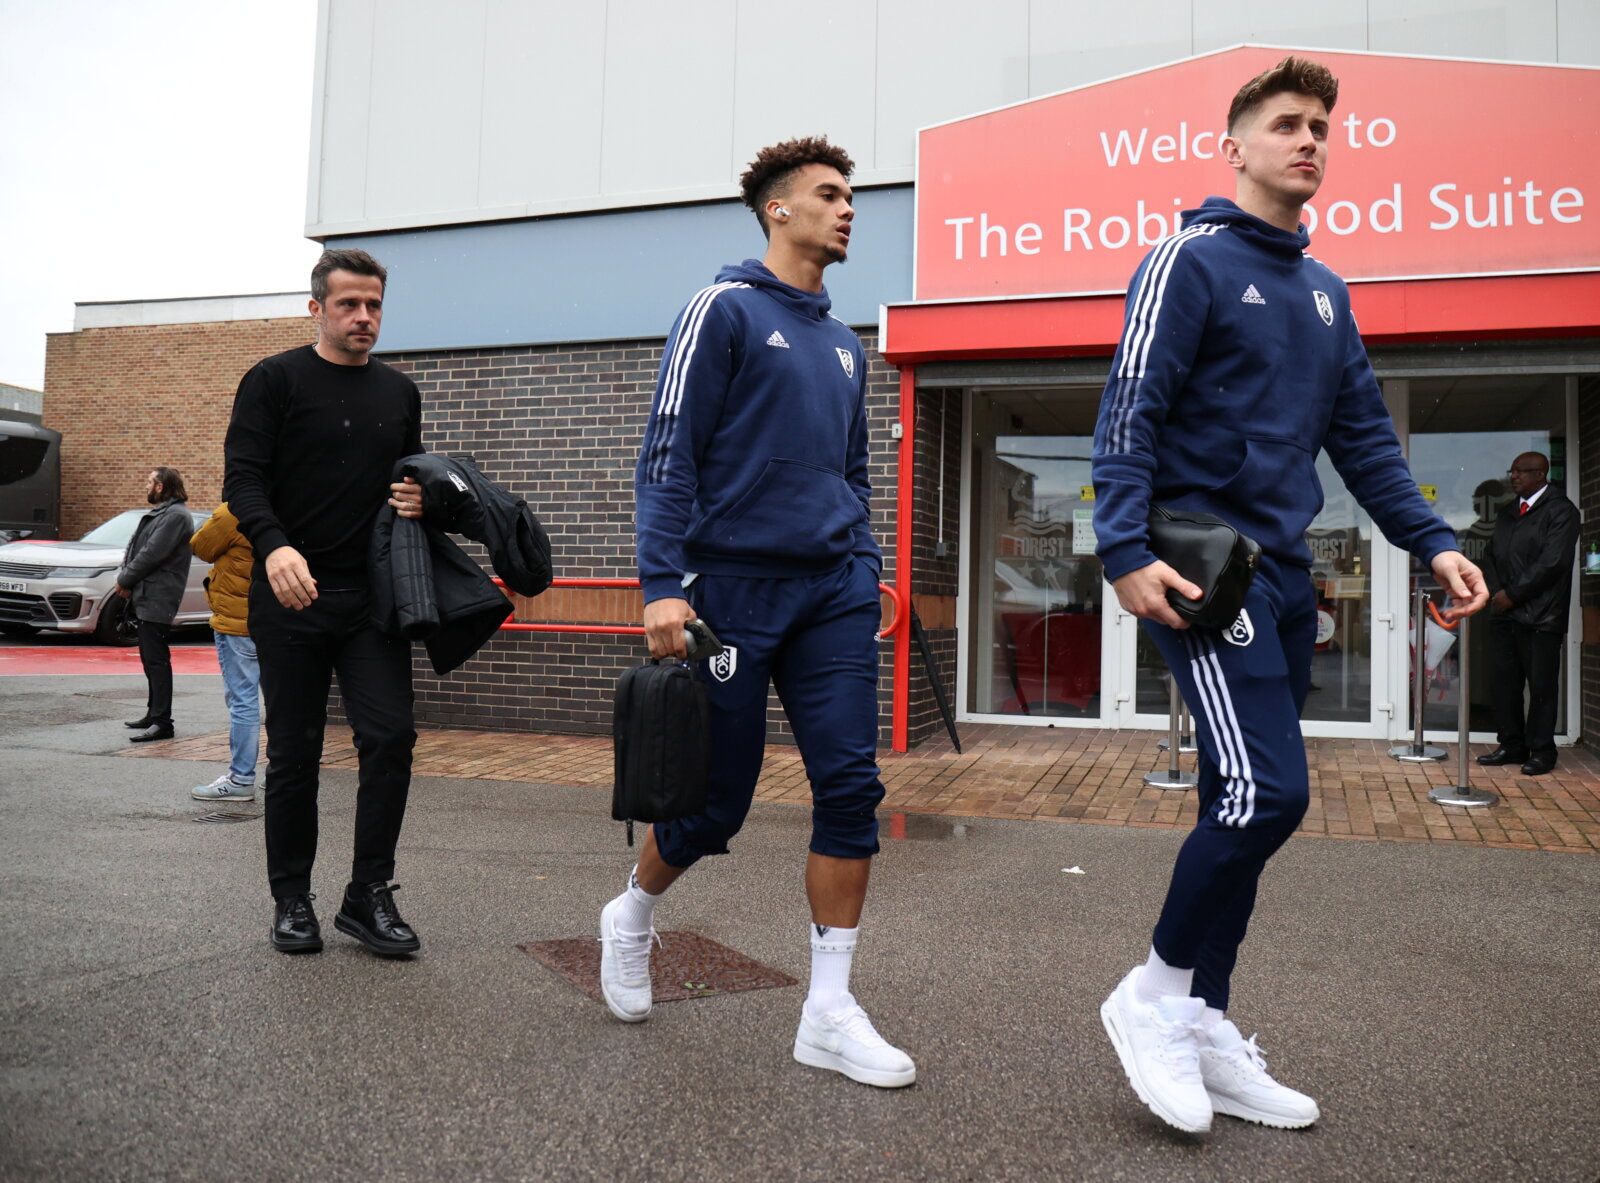 Soccer Football - Championship - Nottingham Forest v Fulham - The City Ground, Nottingham, Britain - October 24, 2021 Fulham's Tom Cairney, Antonee Robinson and manager, Marco Silva arrive at The City Ground Molly Darlington/Action Images ?EDITORIAL USE ONLY. No use with unauthorized audio, video, data, fixture lists, club/league logos or 